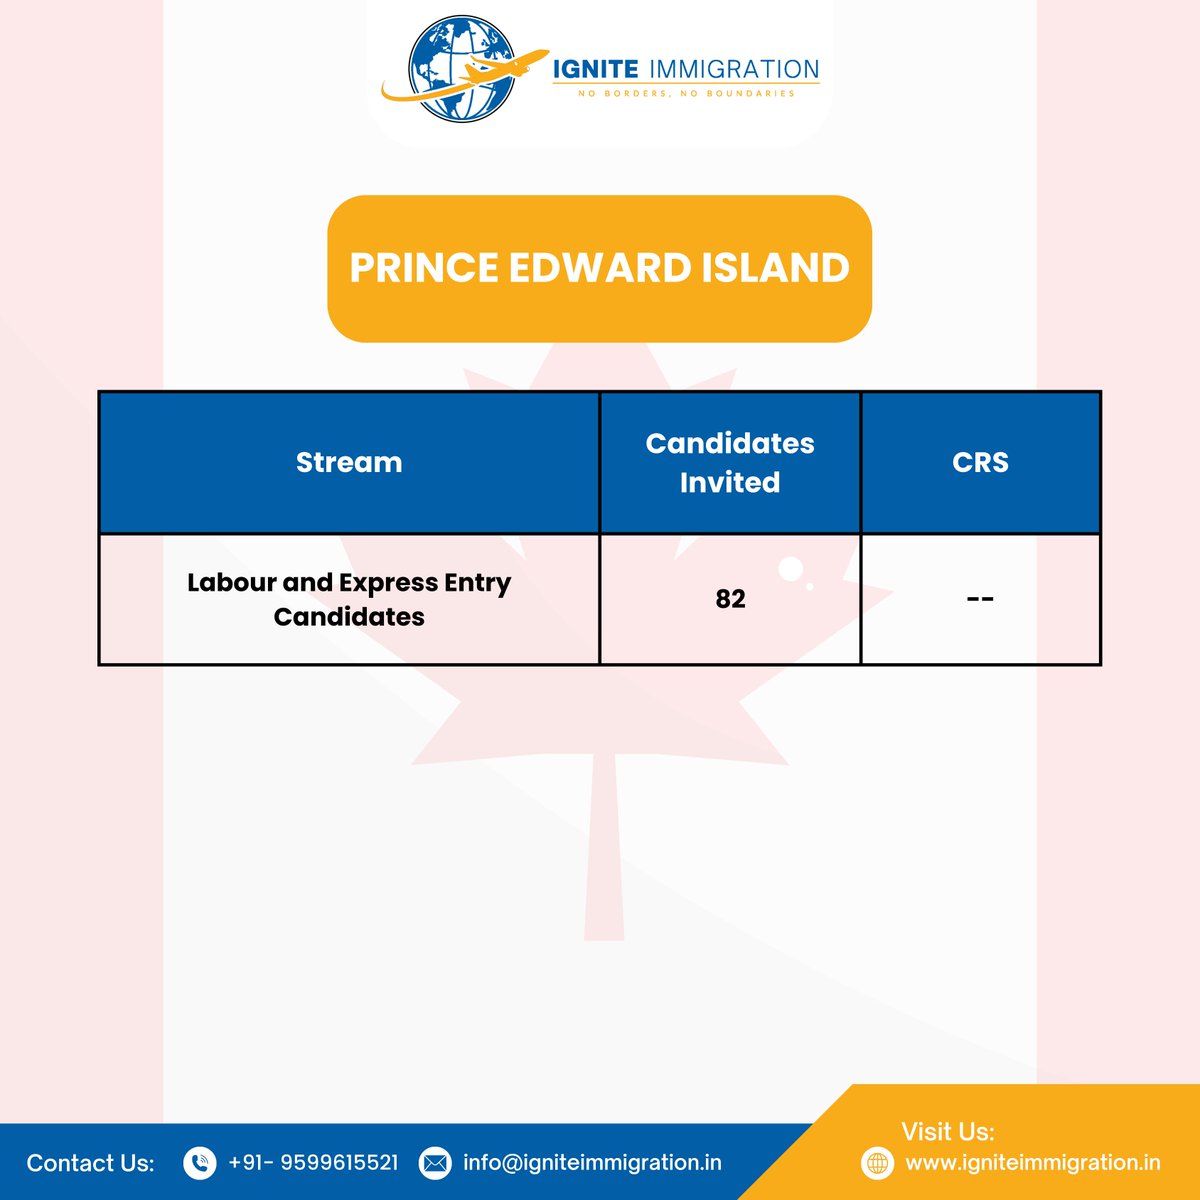 British Columbia (BC) and Prince Edward Island (PEI) have issued provincial immigration invitations this week.

#igniteimmigration #canada #pnpdraw #visasuccess #canadaimmigration